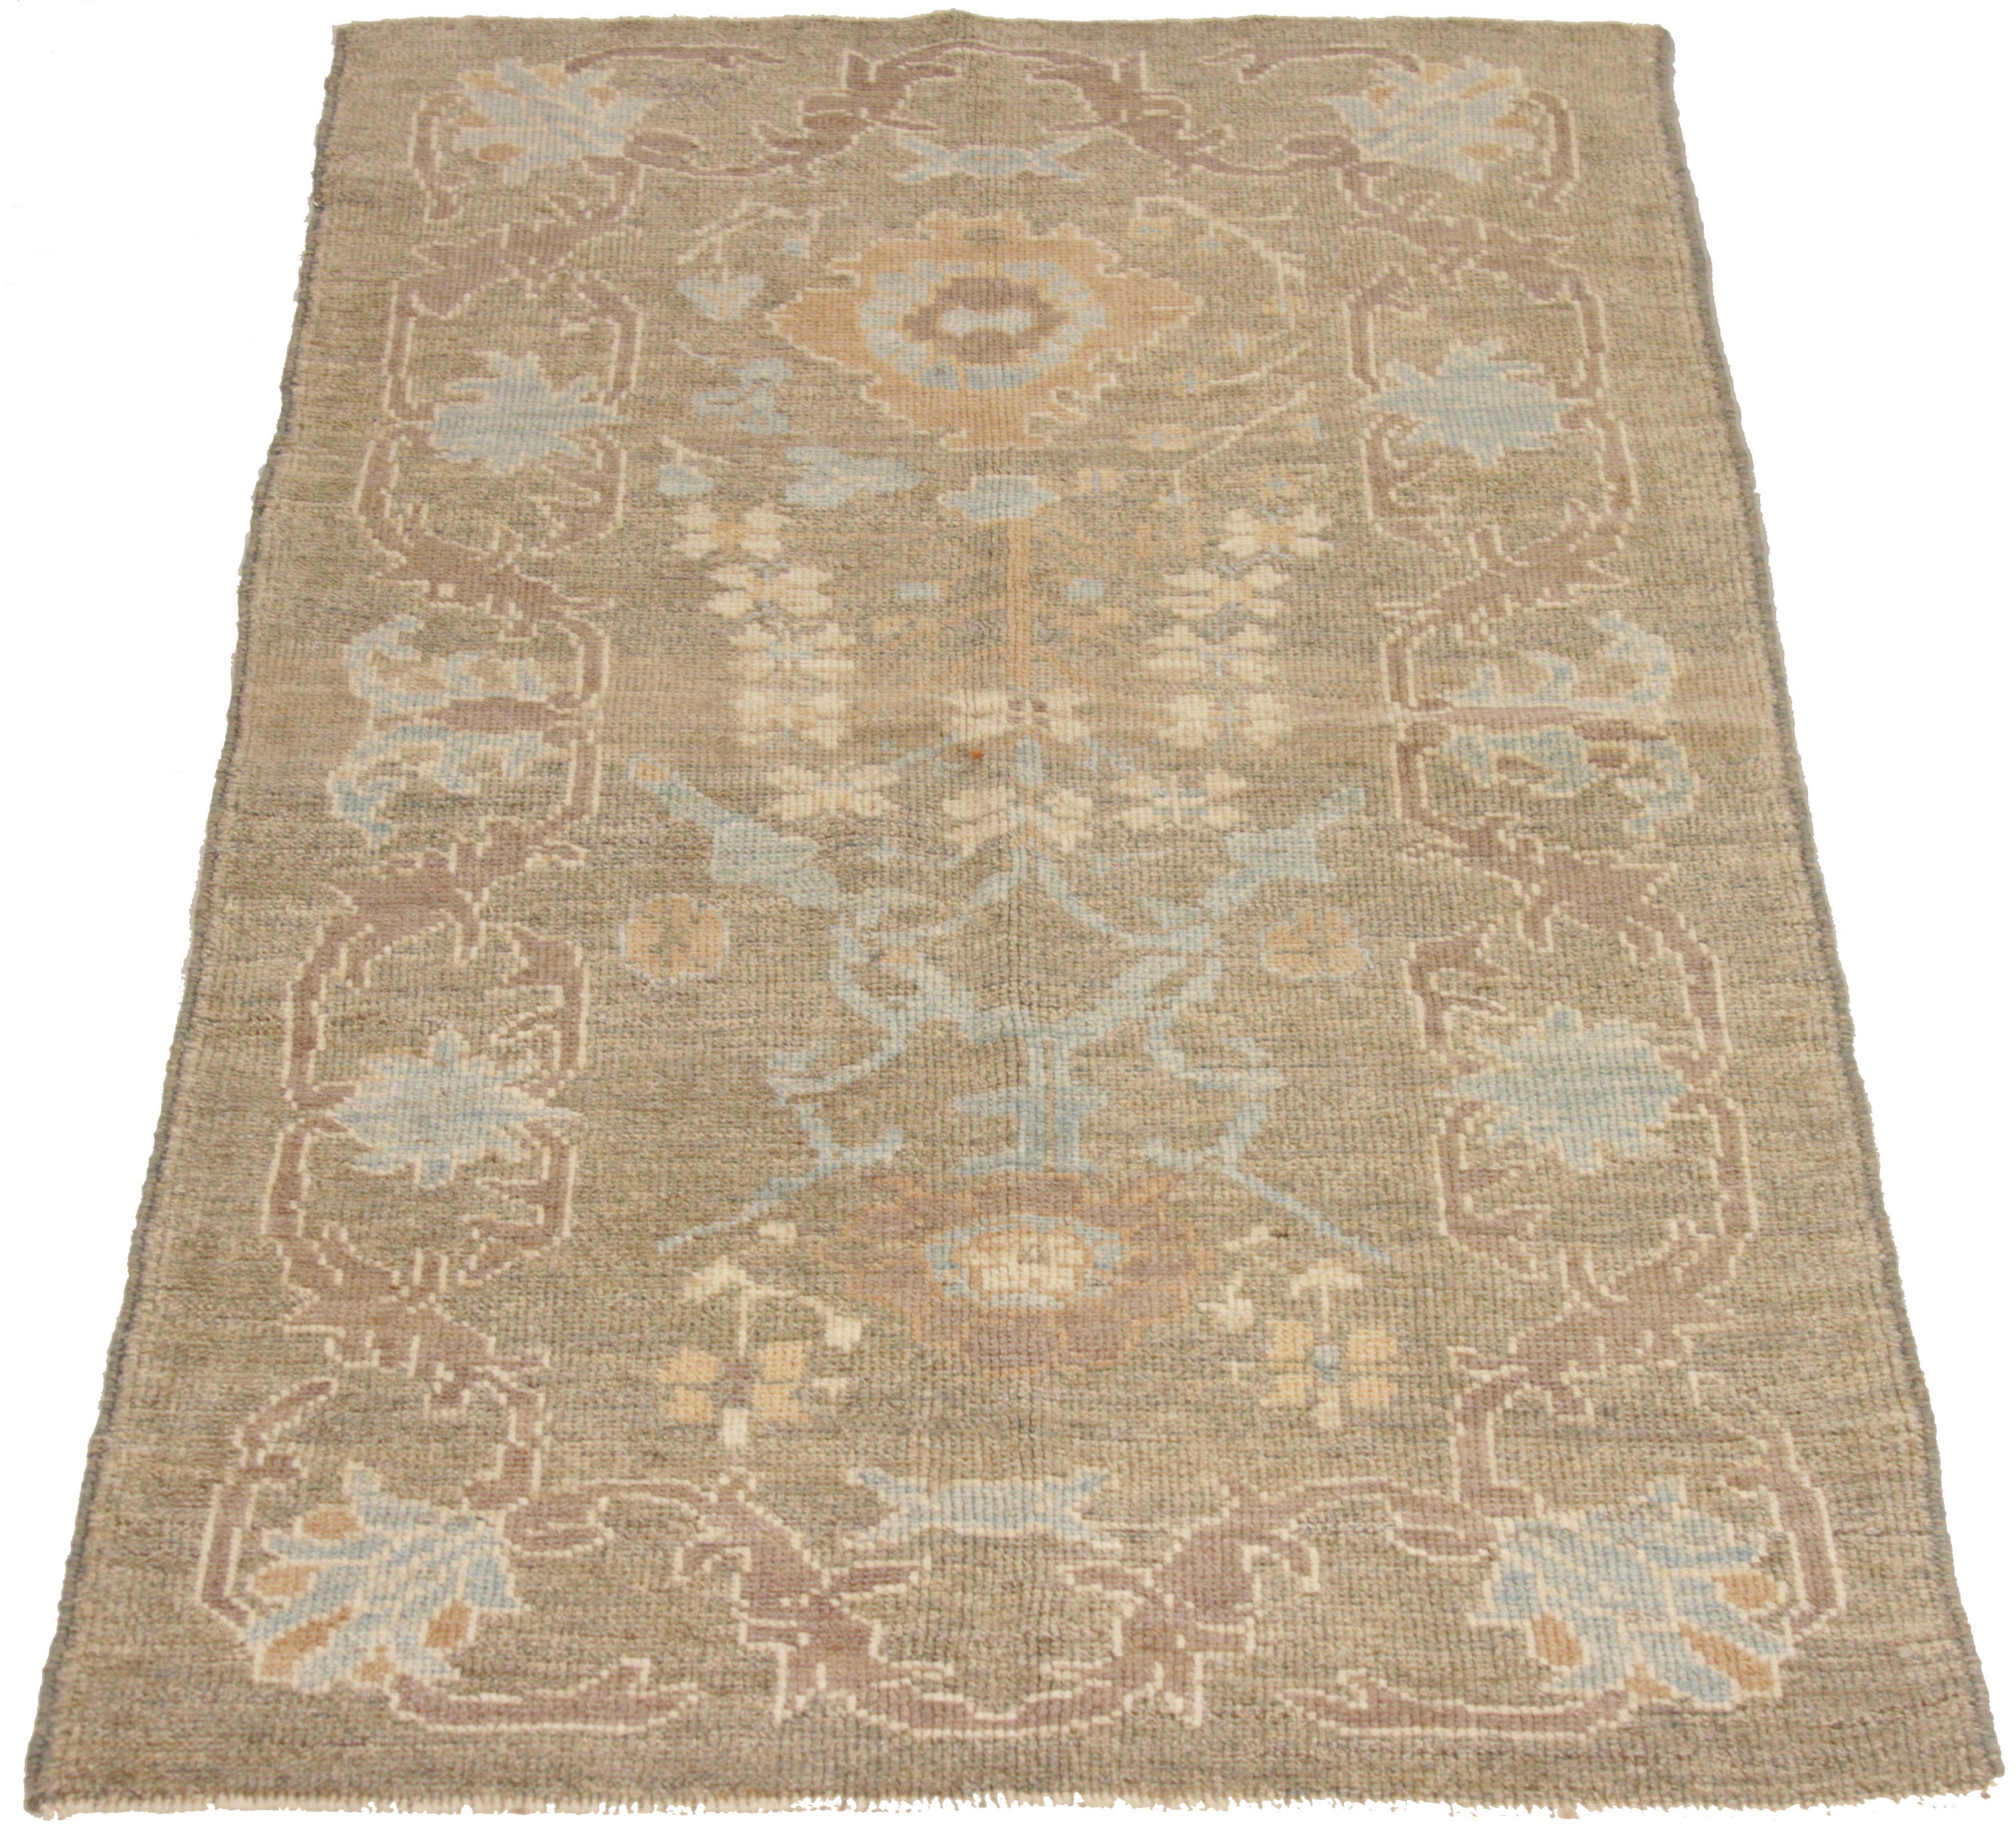 Handcrafted Persian rug made from the finest sheep’s wool and colored with 100% organic vegetable dyes that are safe for humans and pets. It shows a traditional Oushak design featuring a beige field with blue and brown floral patterns. It’s an